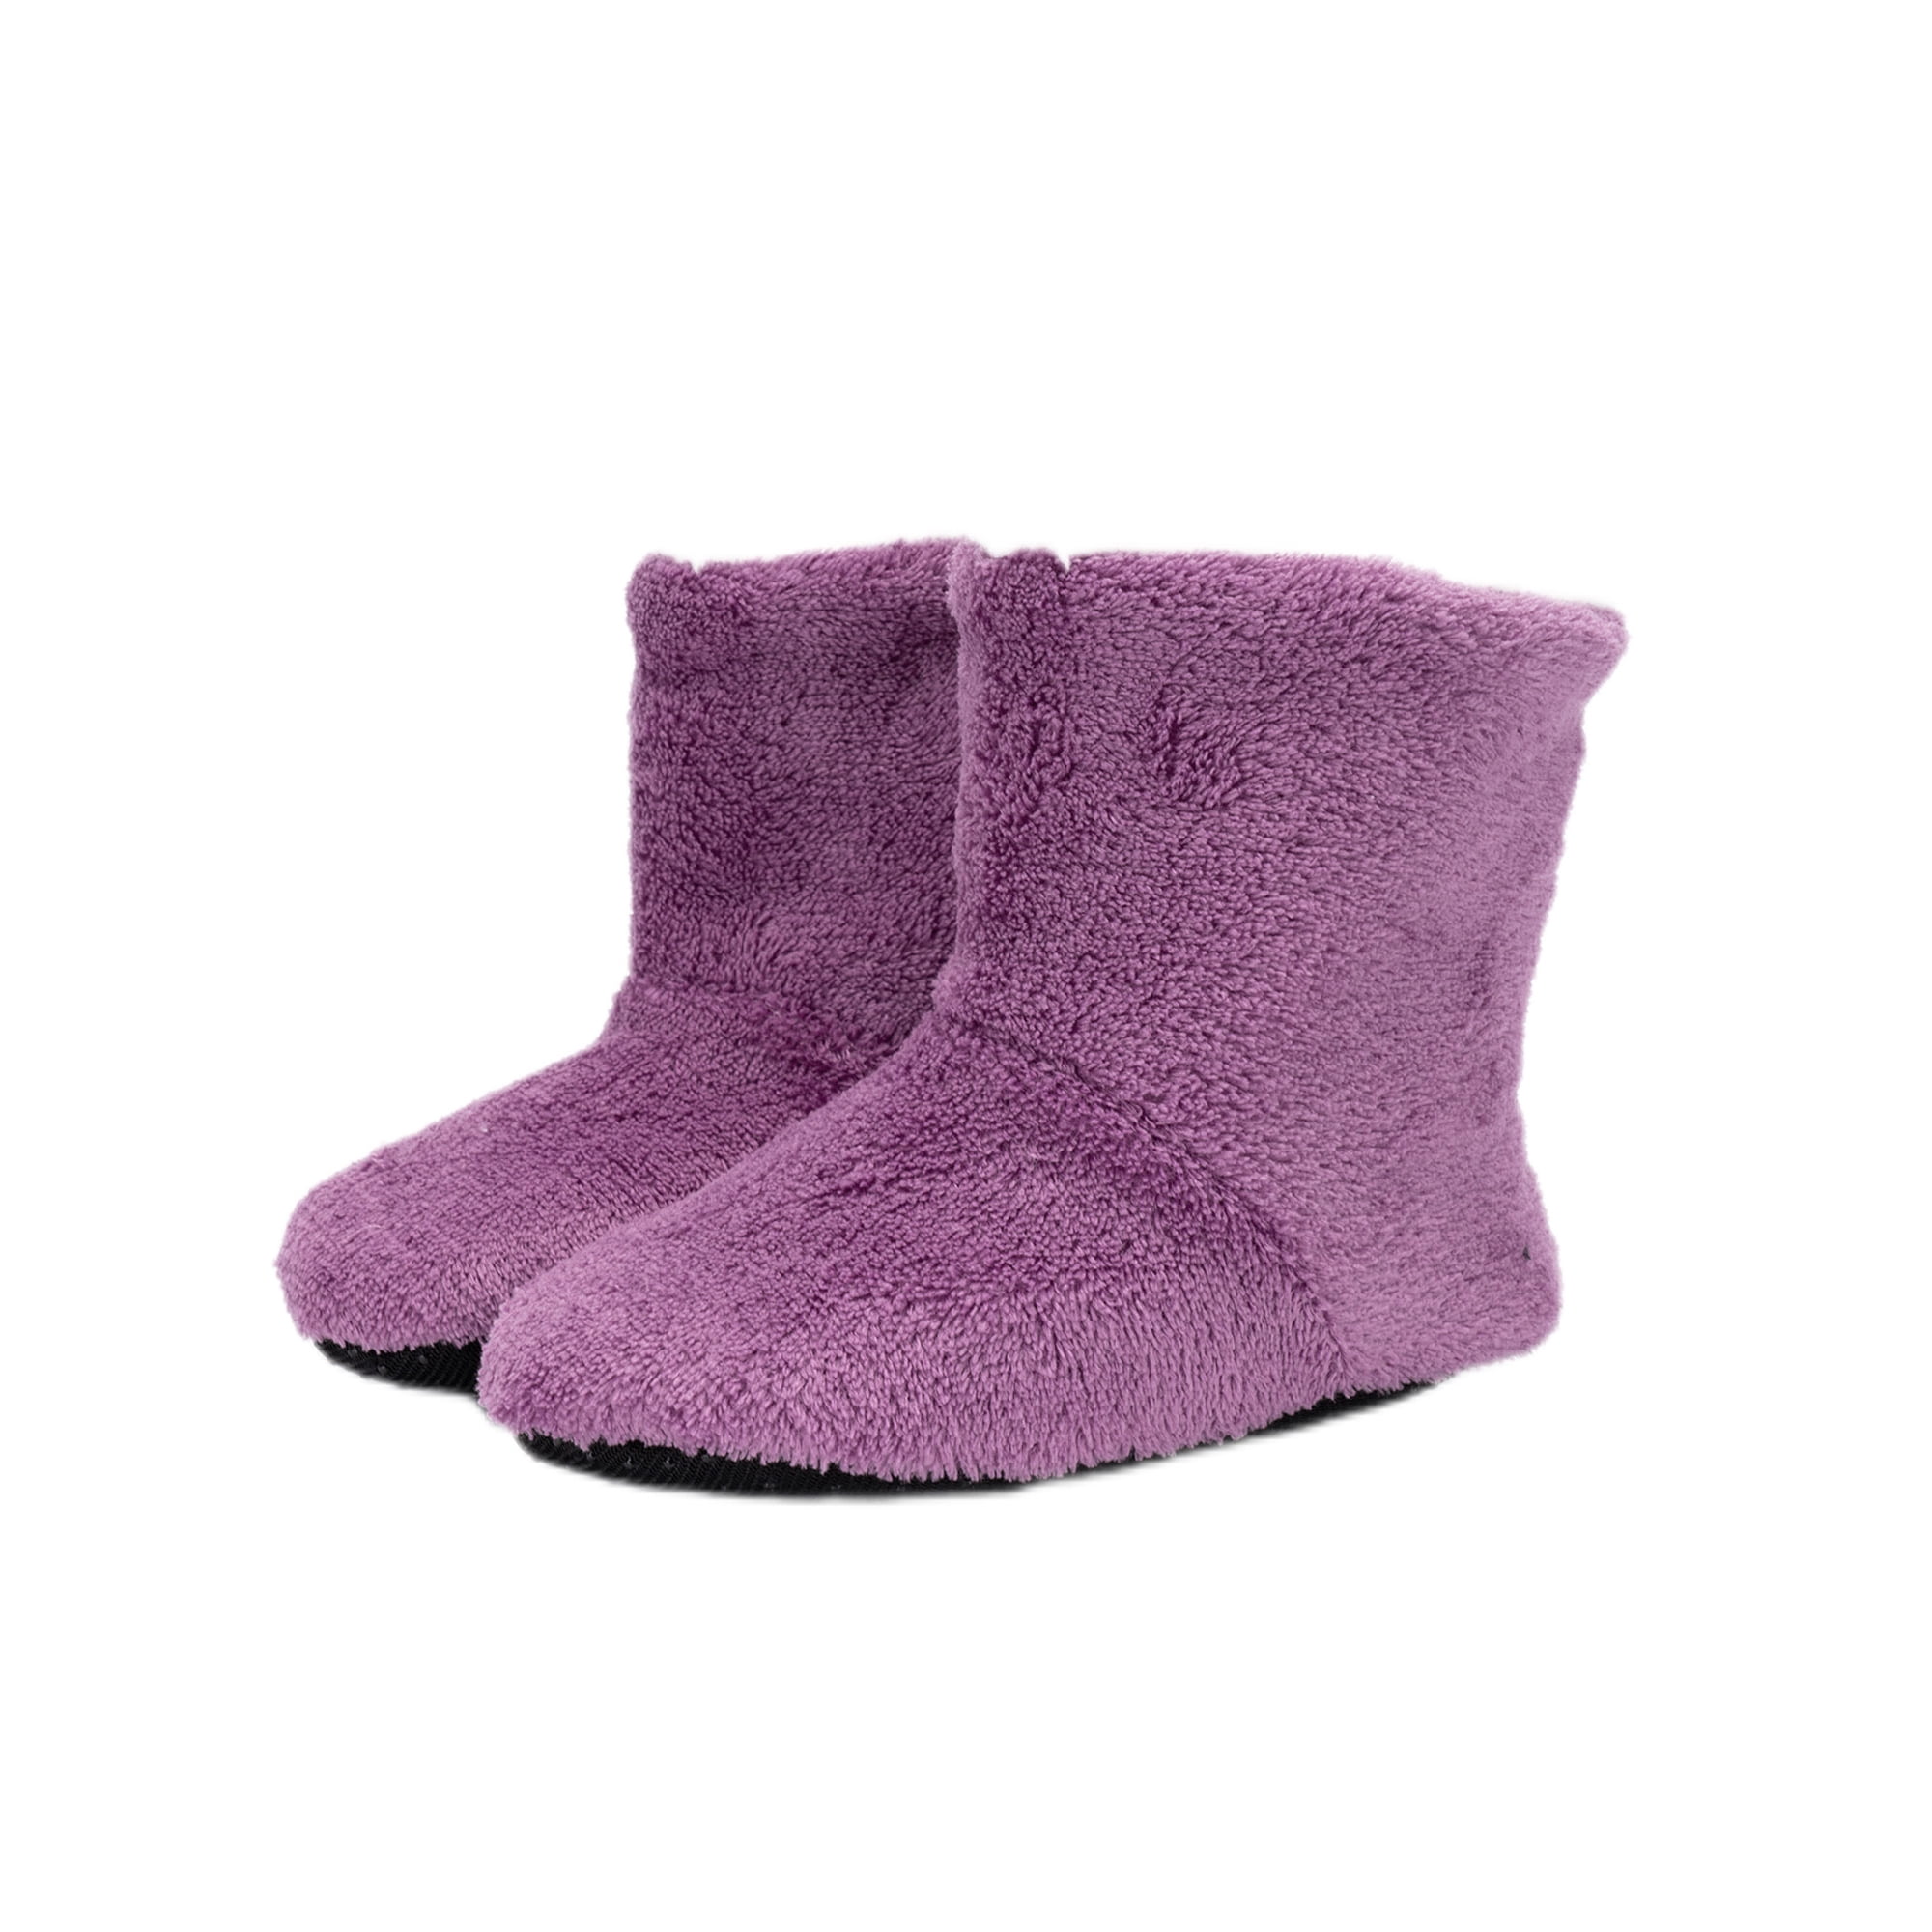 LUXUR Womens Booties Socks Winter House Slippers Insulated Boots Xmas Warm Shoes Gifts - Walmart.com